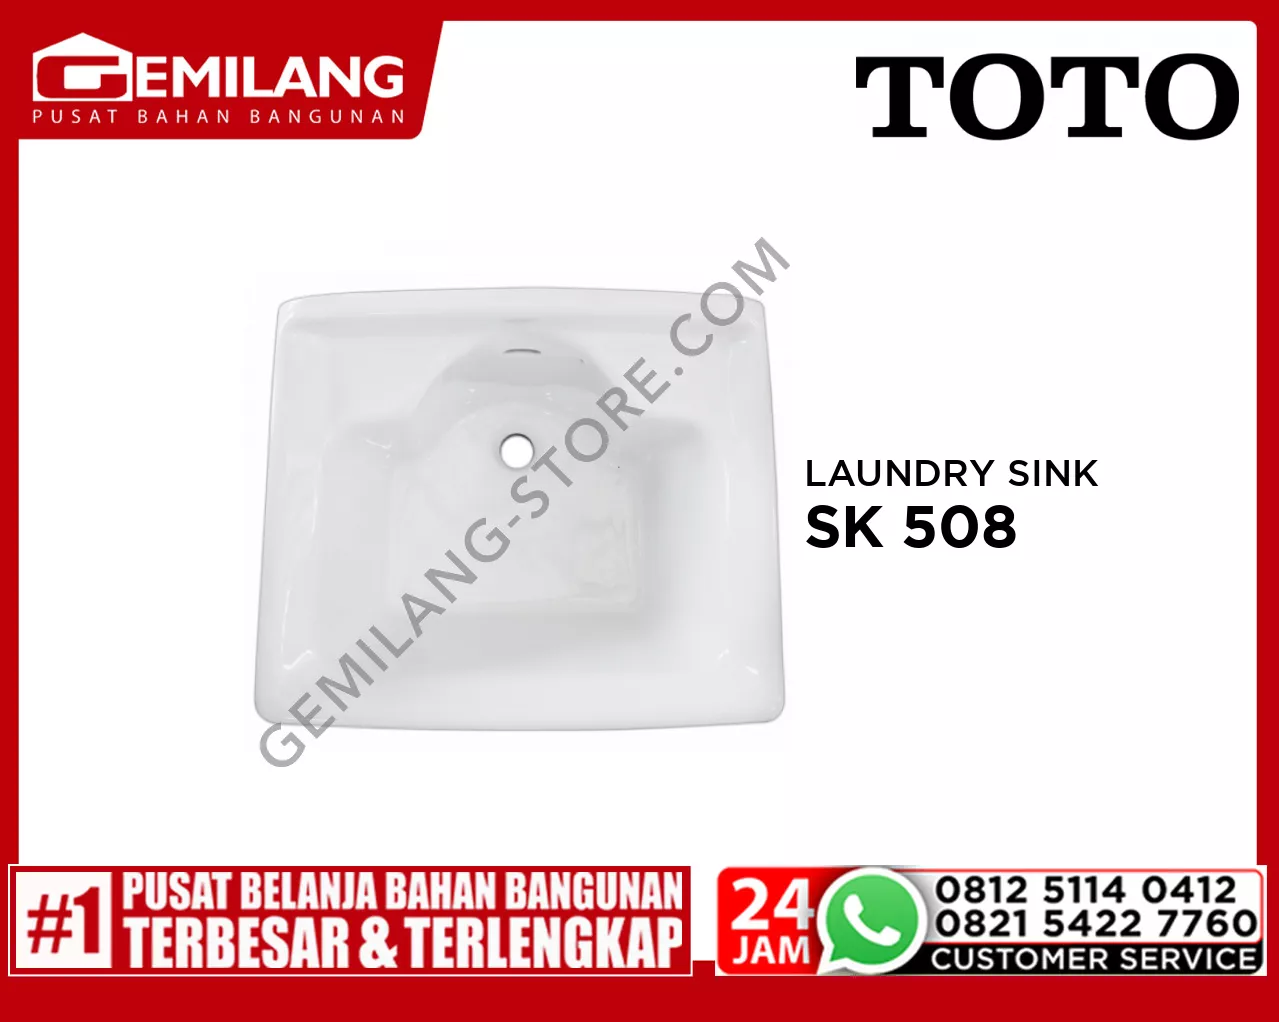 TOTO LAUNDRY SINK SK 508 WHITE